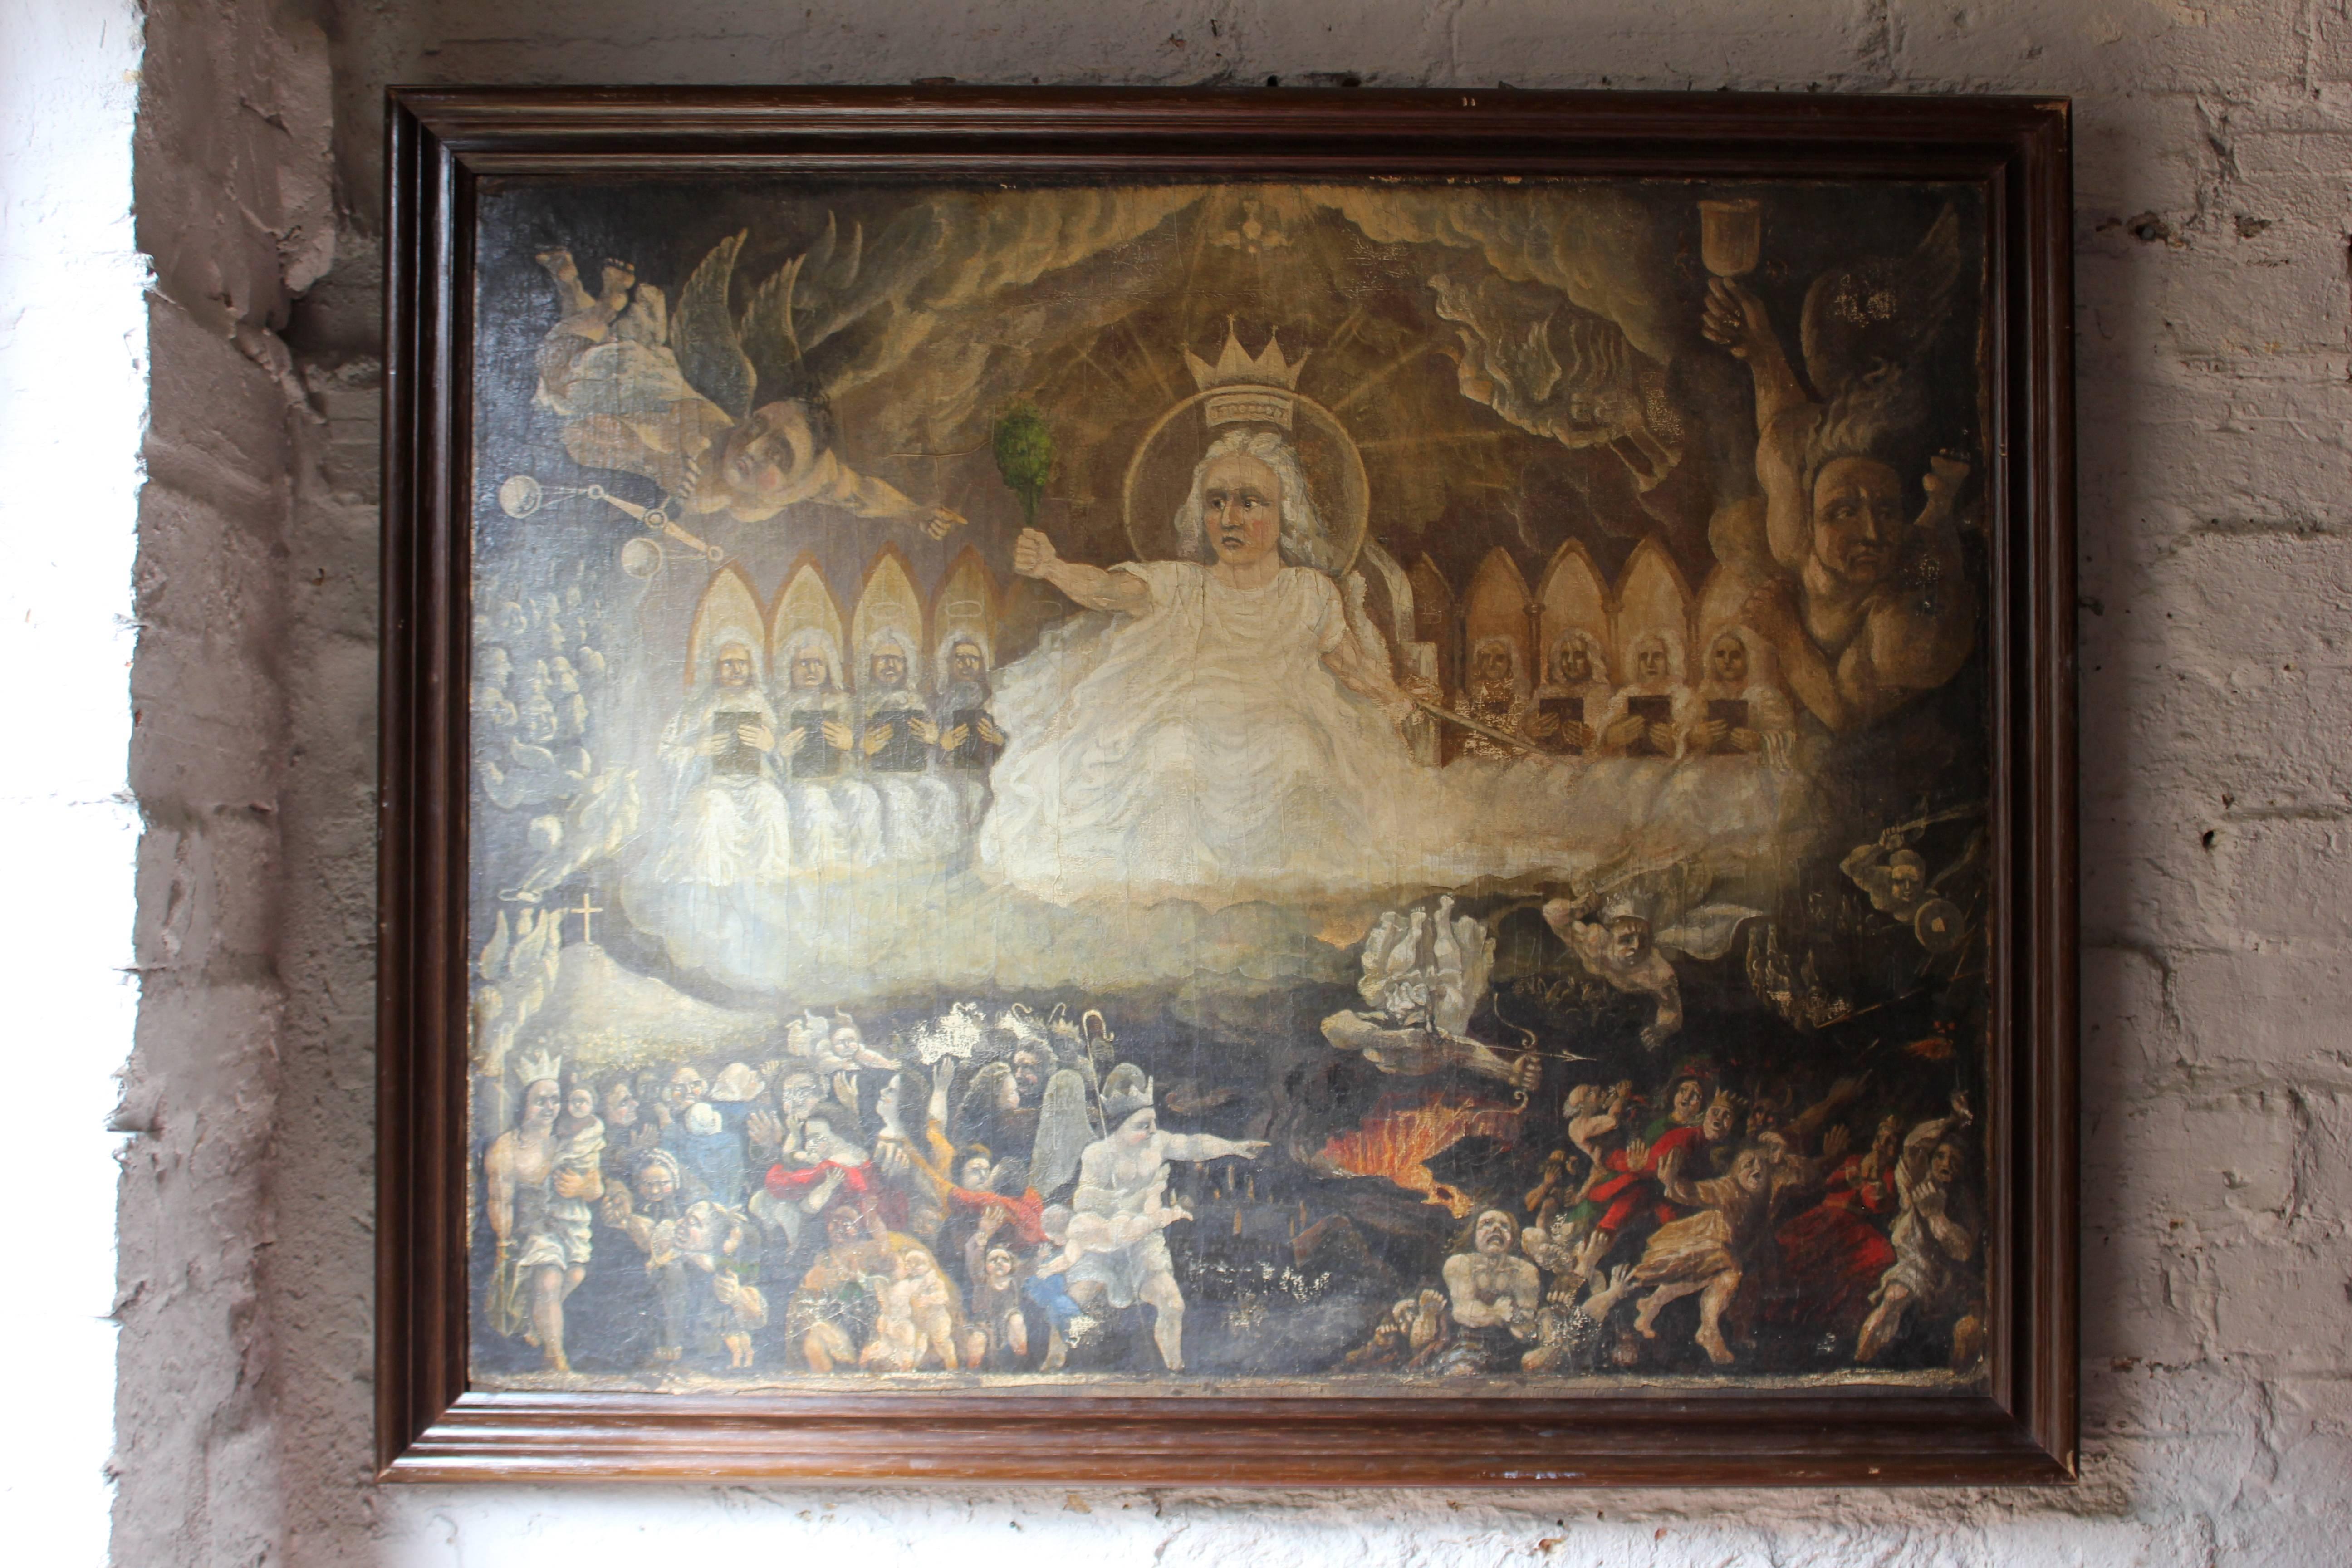 The wonderfully depicted scene of the last judgement painted in oil on canvas, showing Christ on the Throne of Judgment with Heaven and Hell to each flank, the body of work busy with figures, iconography and symbolism, presented in a 20th century